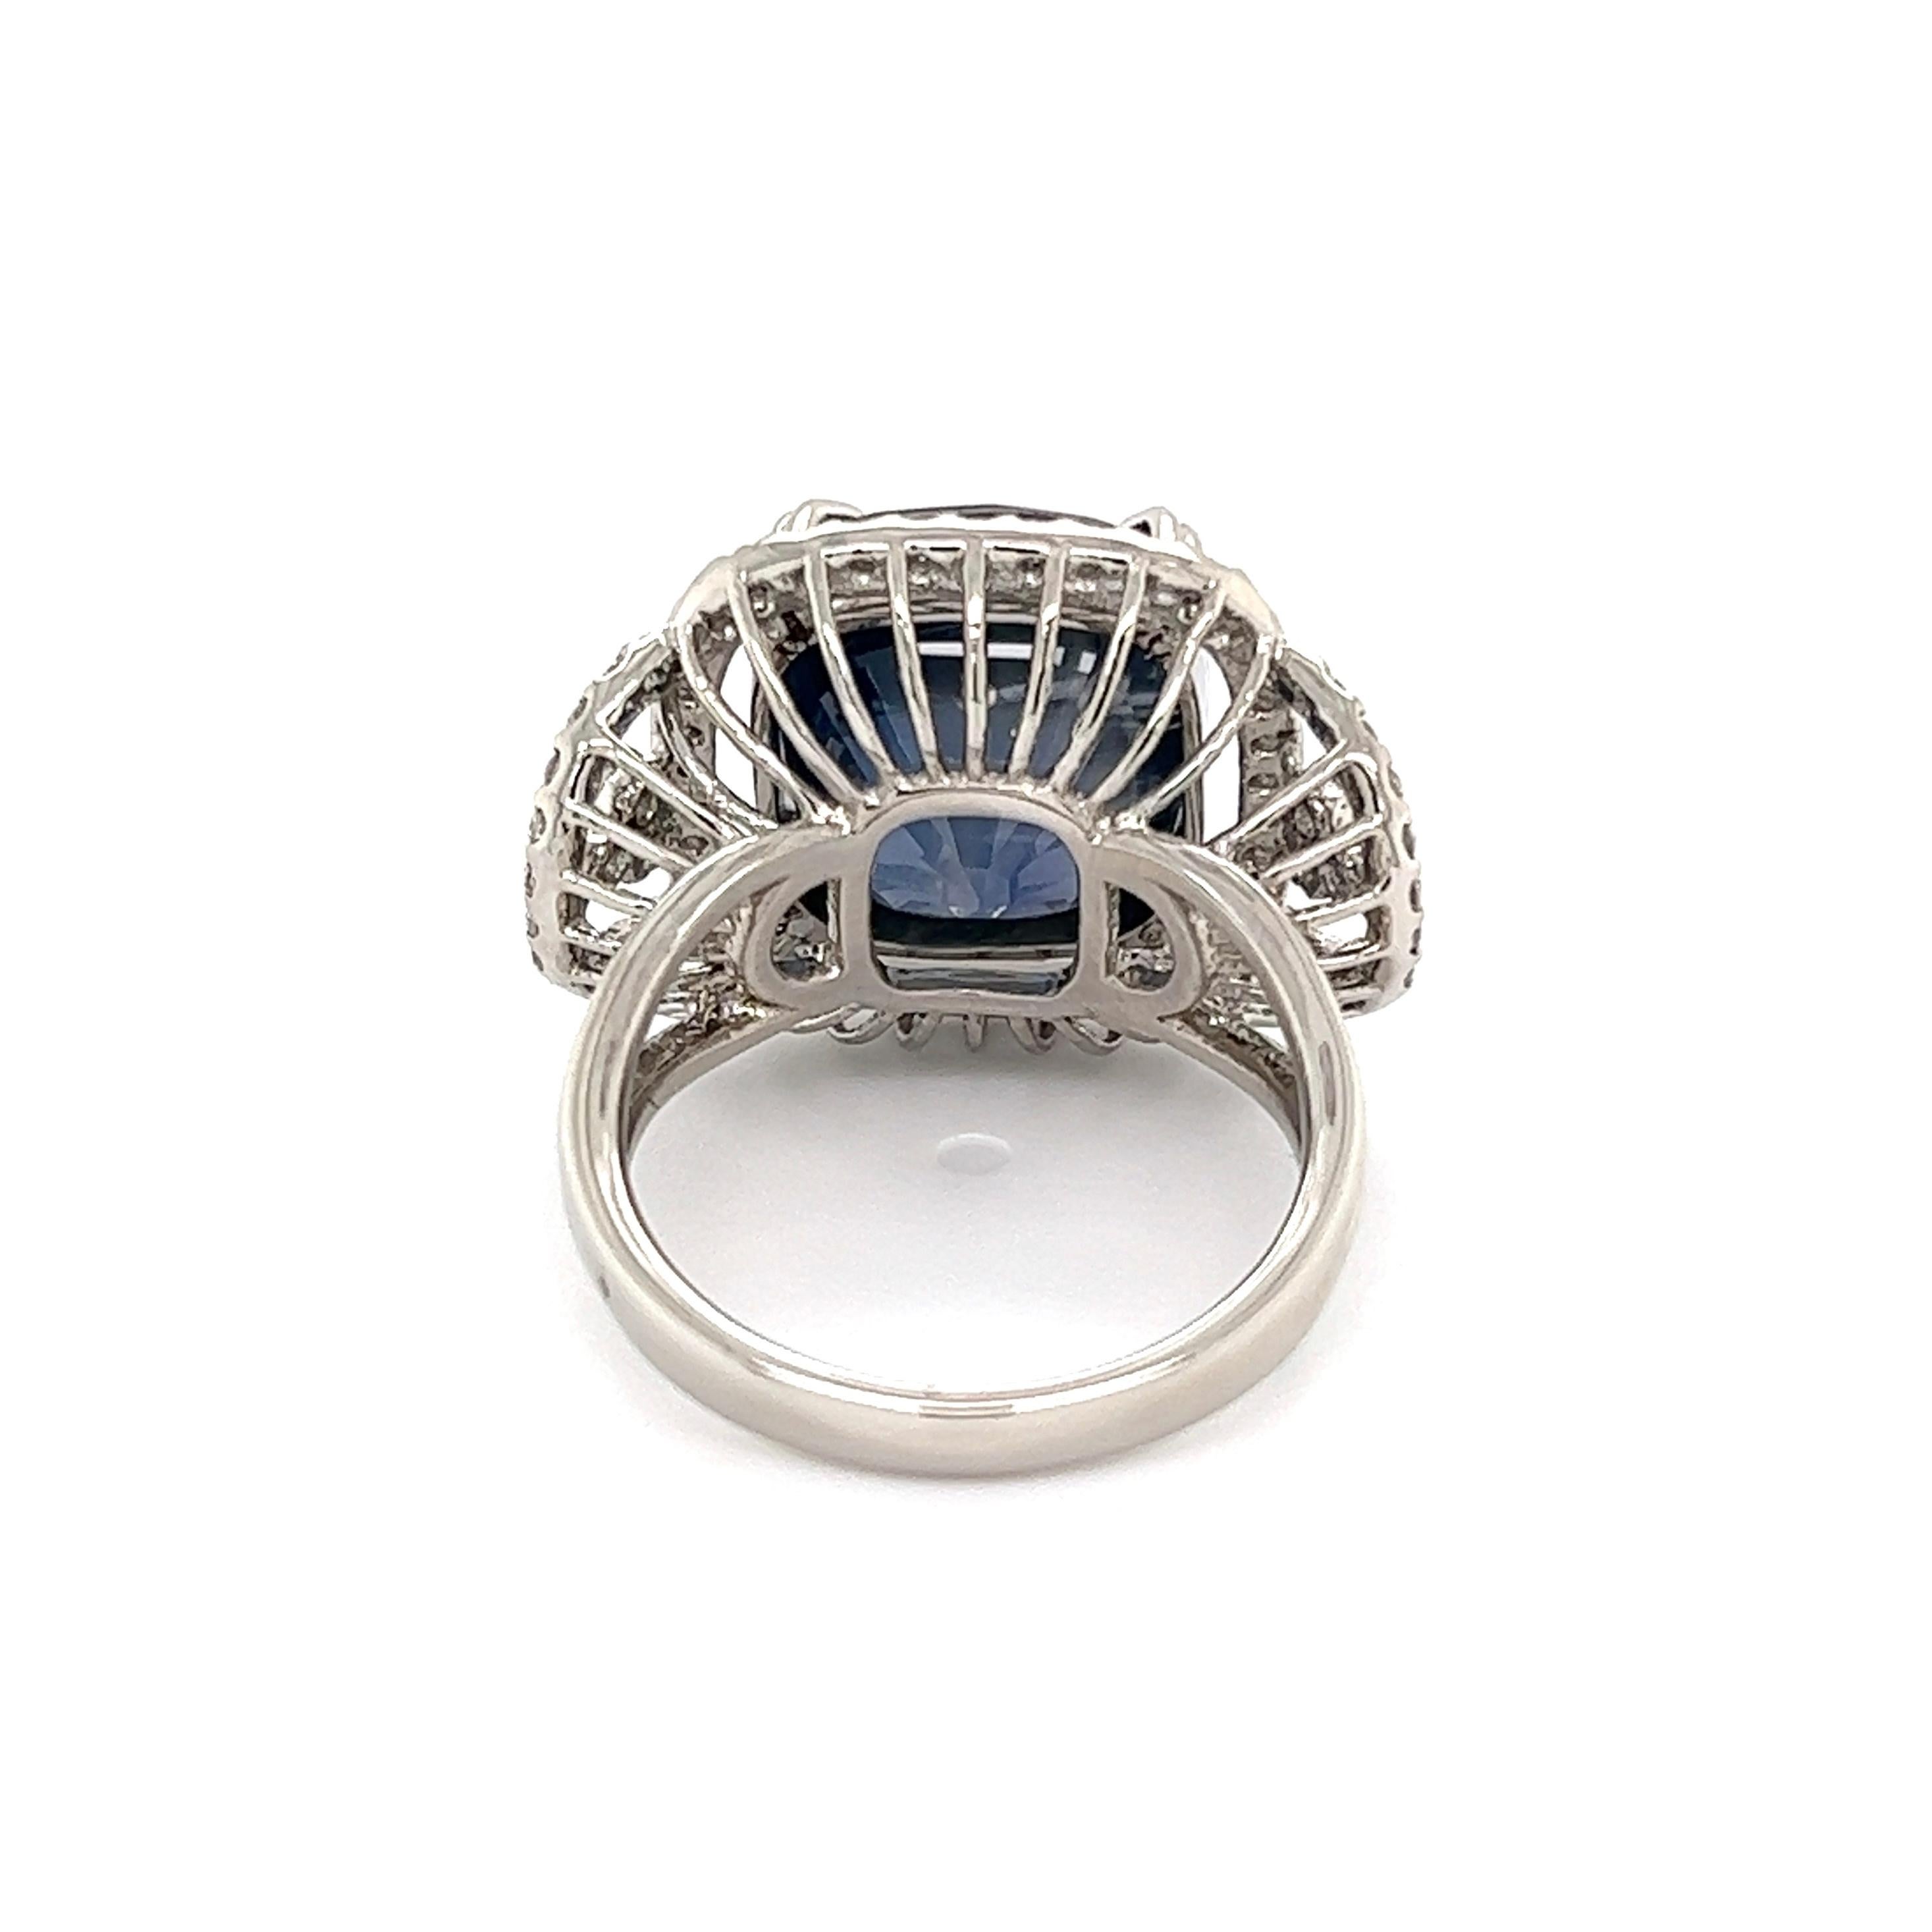 15.08 Carat Cushion Sapphire and Diamond Platinum Ring Estate Fine Jewelry In Excellent Condition For Sale In Montreal, QC